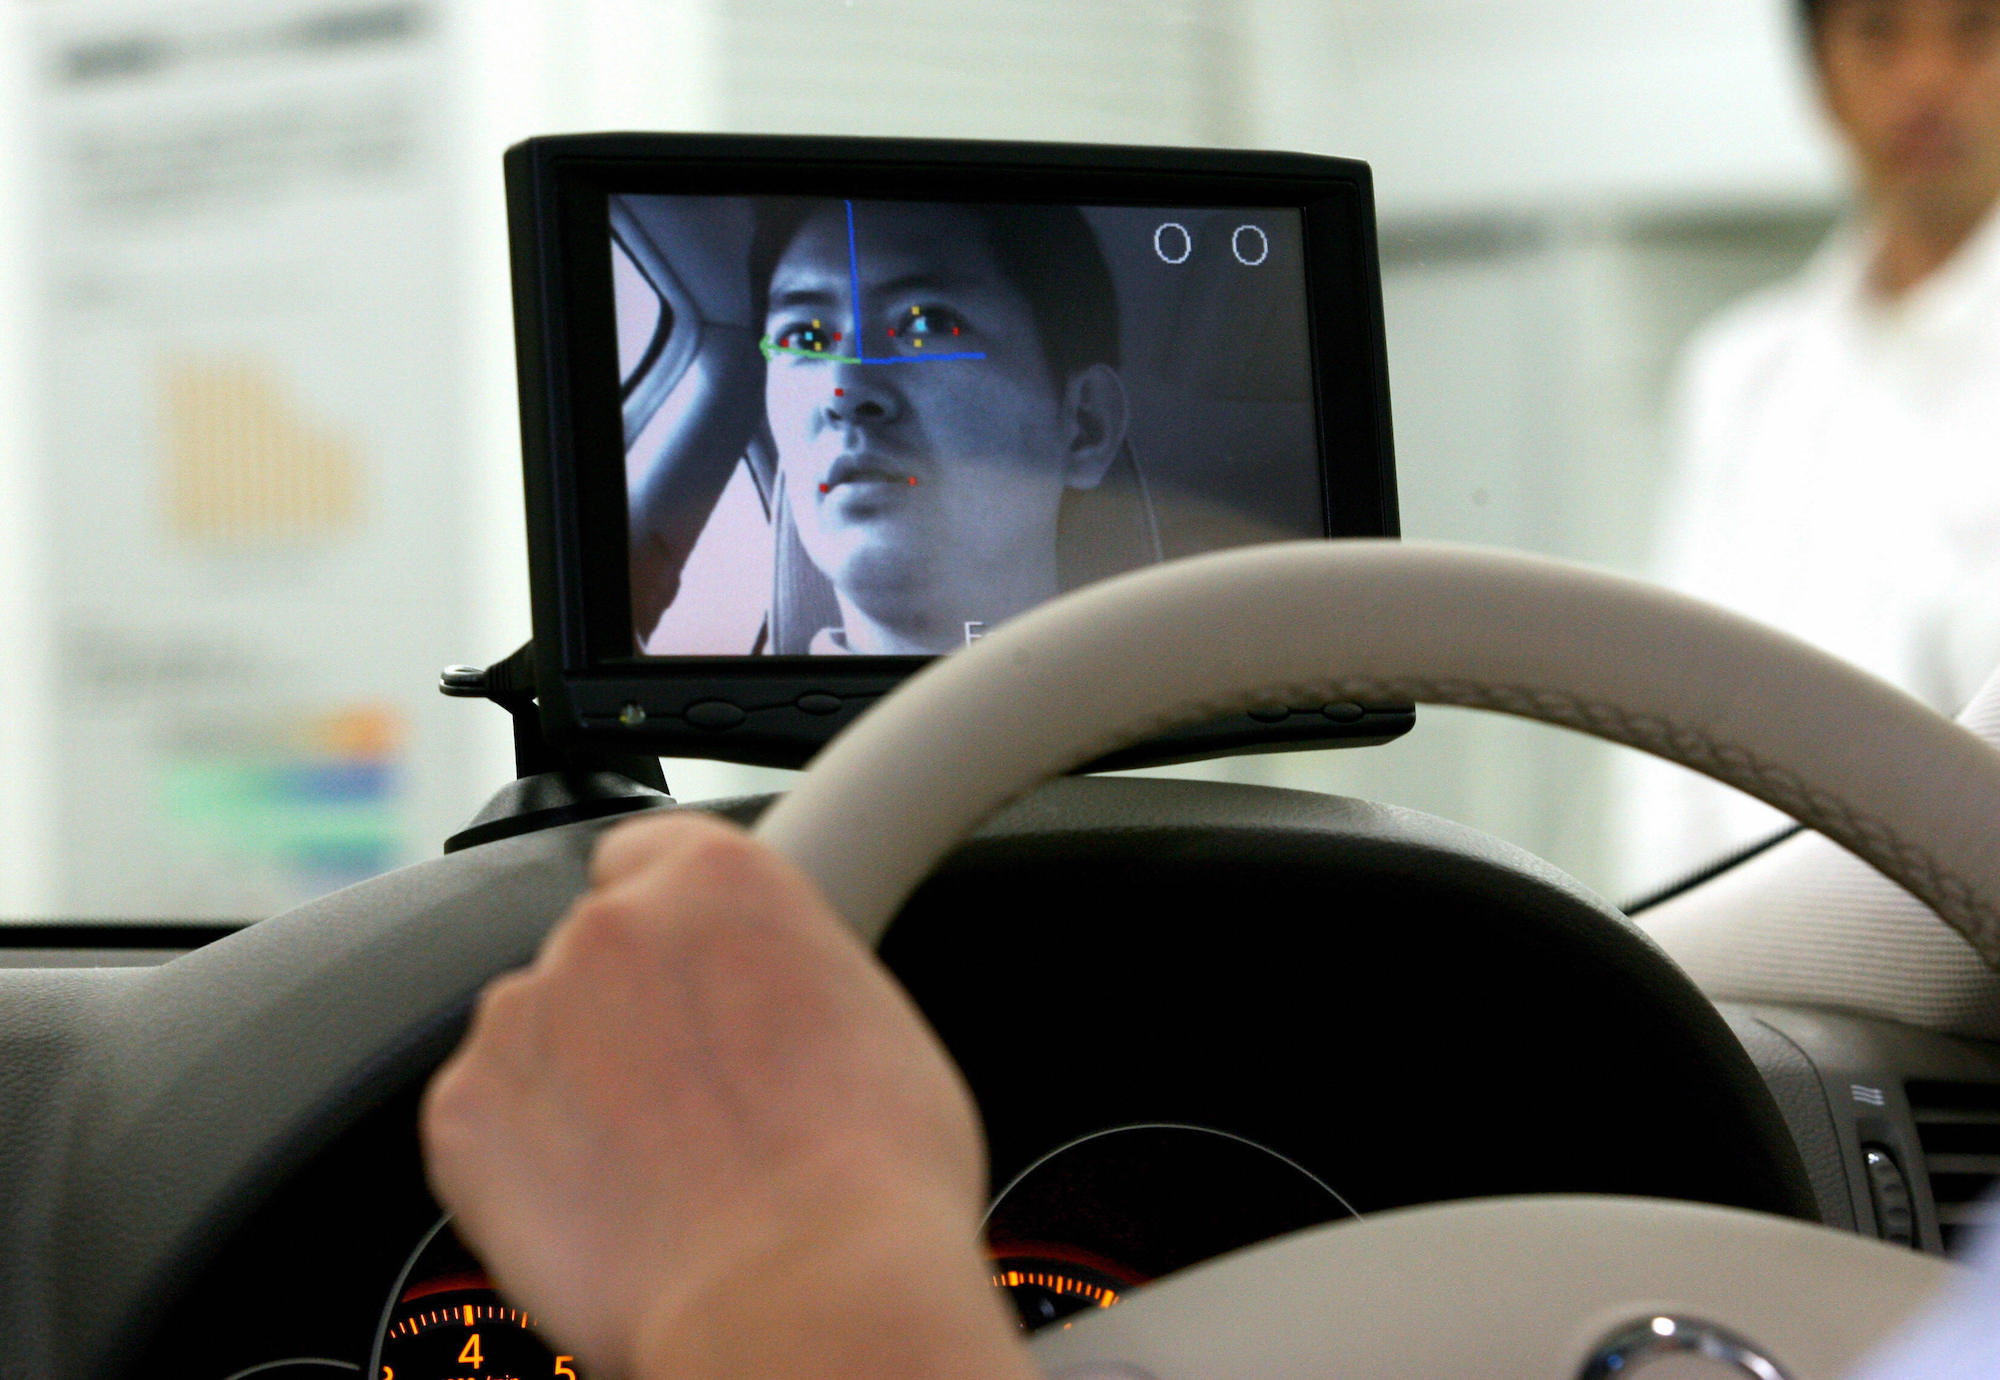 Nissan illustrates its facial recognition system, monitoring a driver's face to detect signs of drowsiness